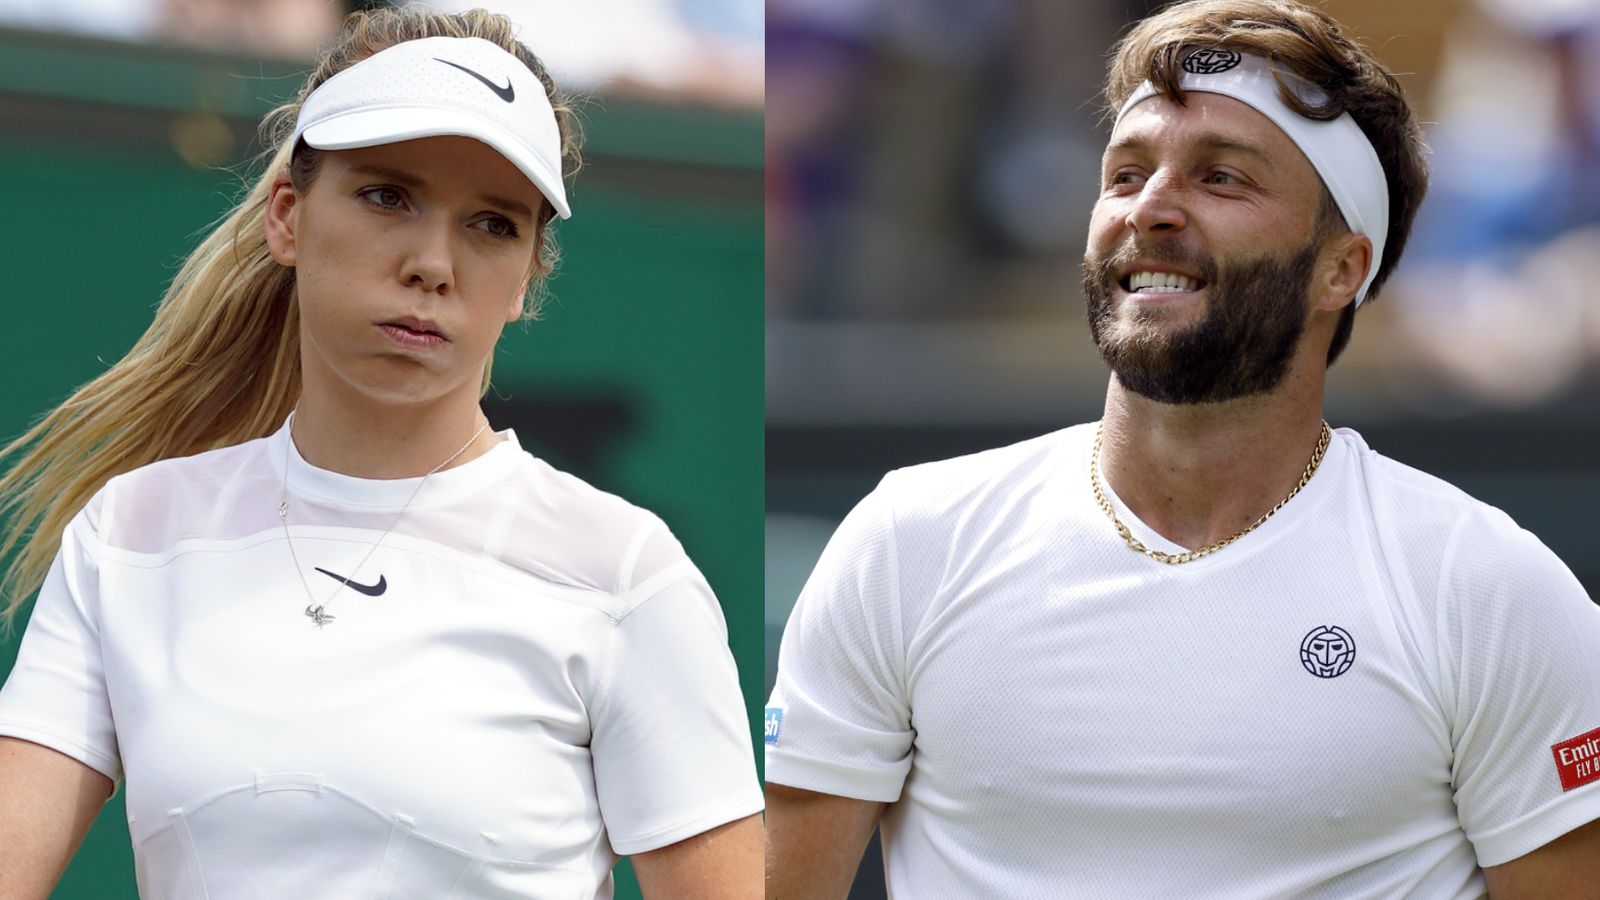 Wimbledon: Katie Boulter And Liam Broady Fail To Join Cameron Norrie And Heather Watson In The Fourth Round